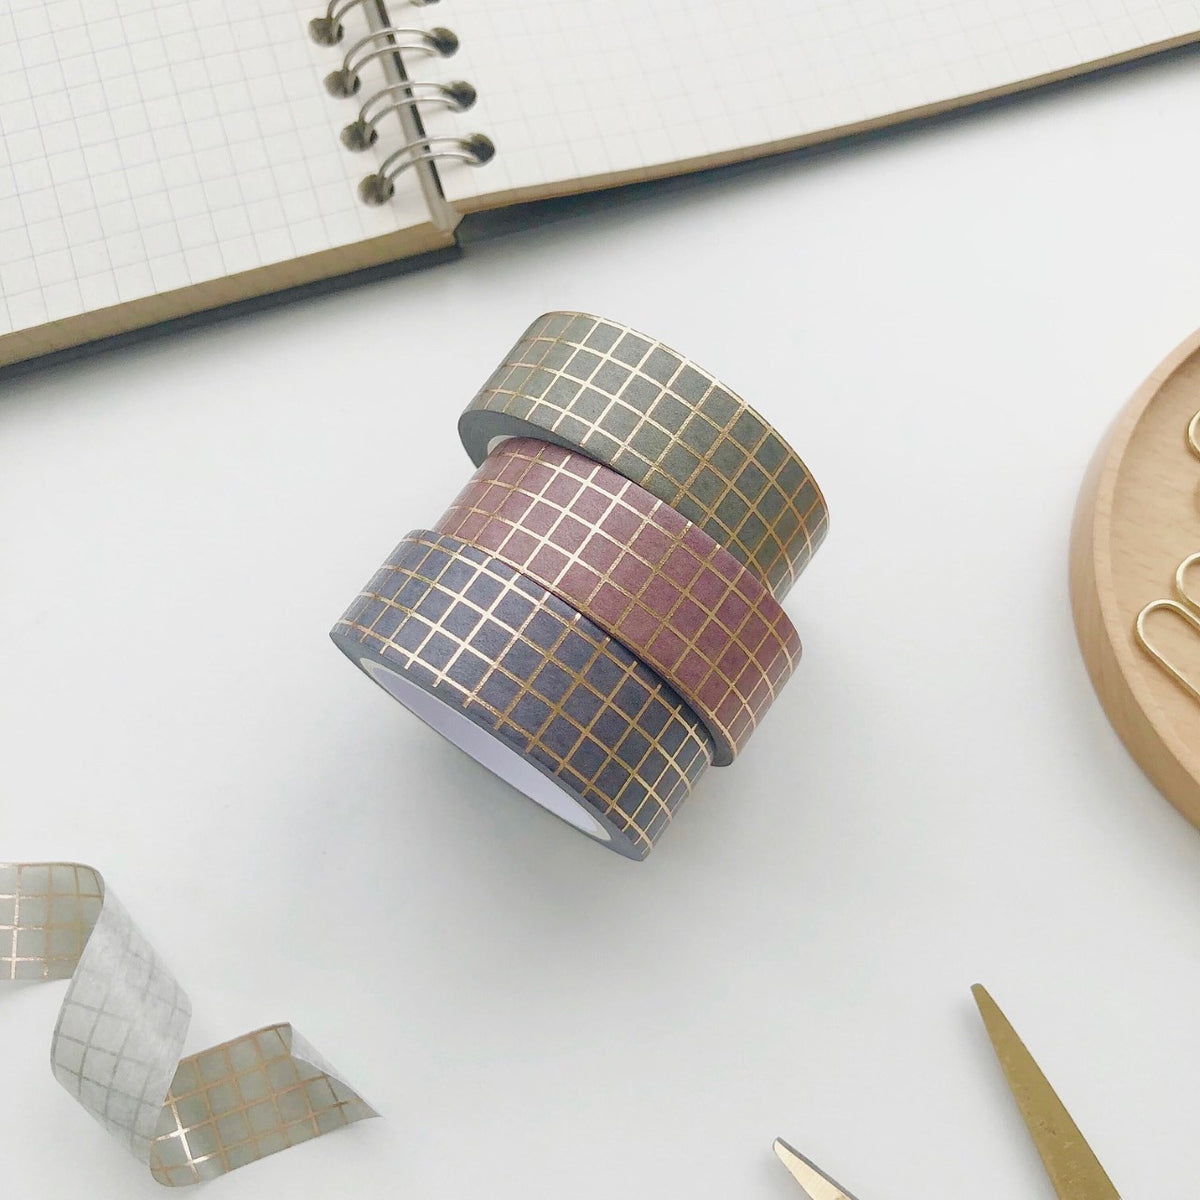 Rose Gold Foil Narrow Crafting Washi Tape Set by Recollections™